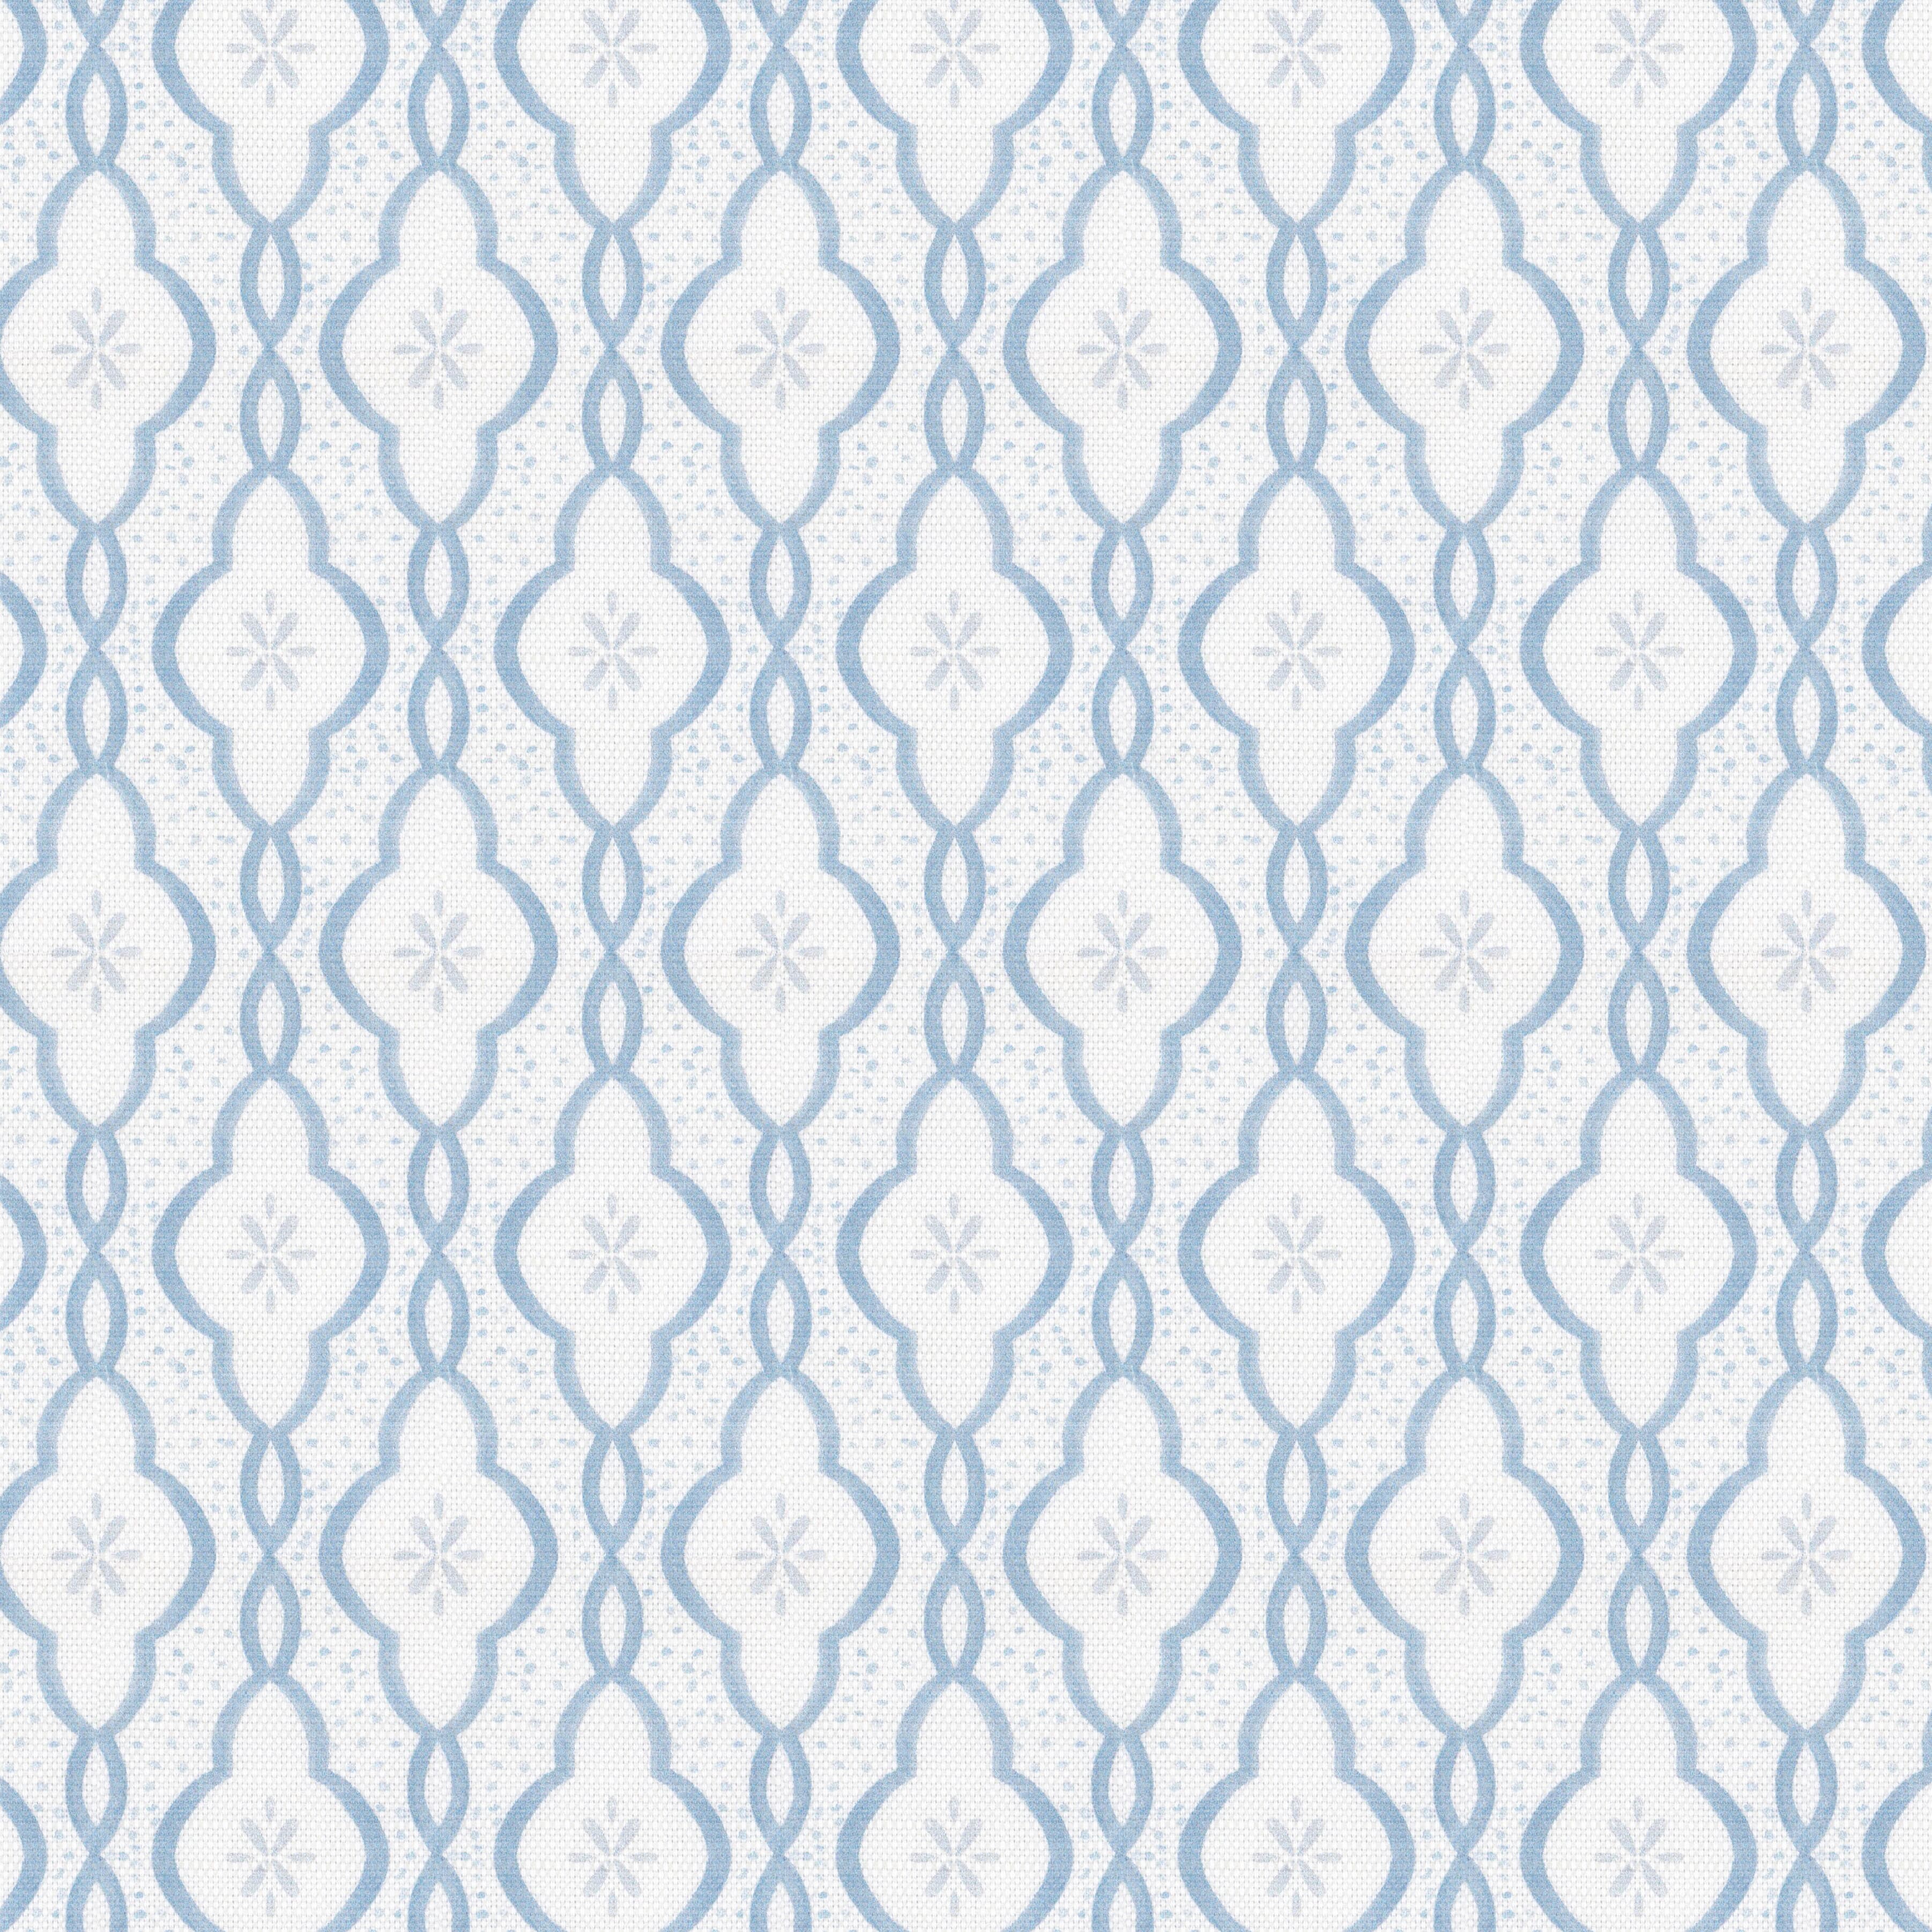 7840 Morocco 3 Moonstone by Stout Fabric